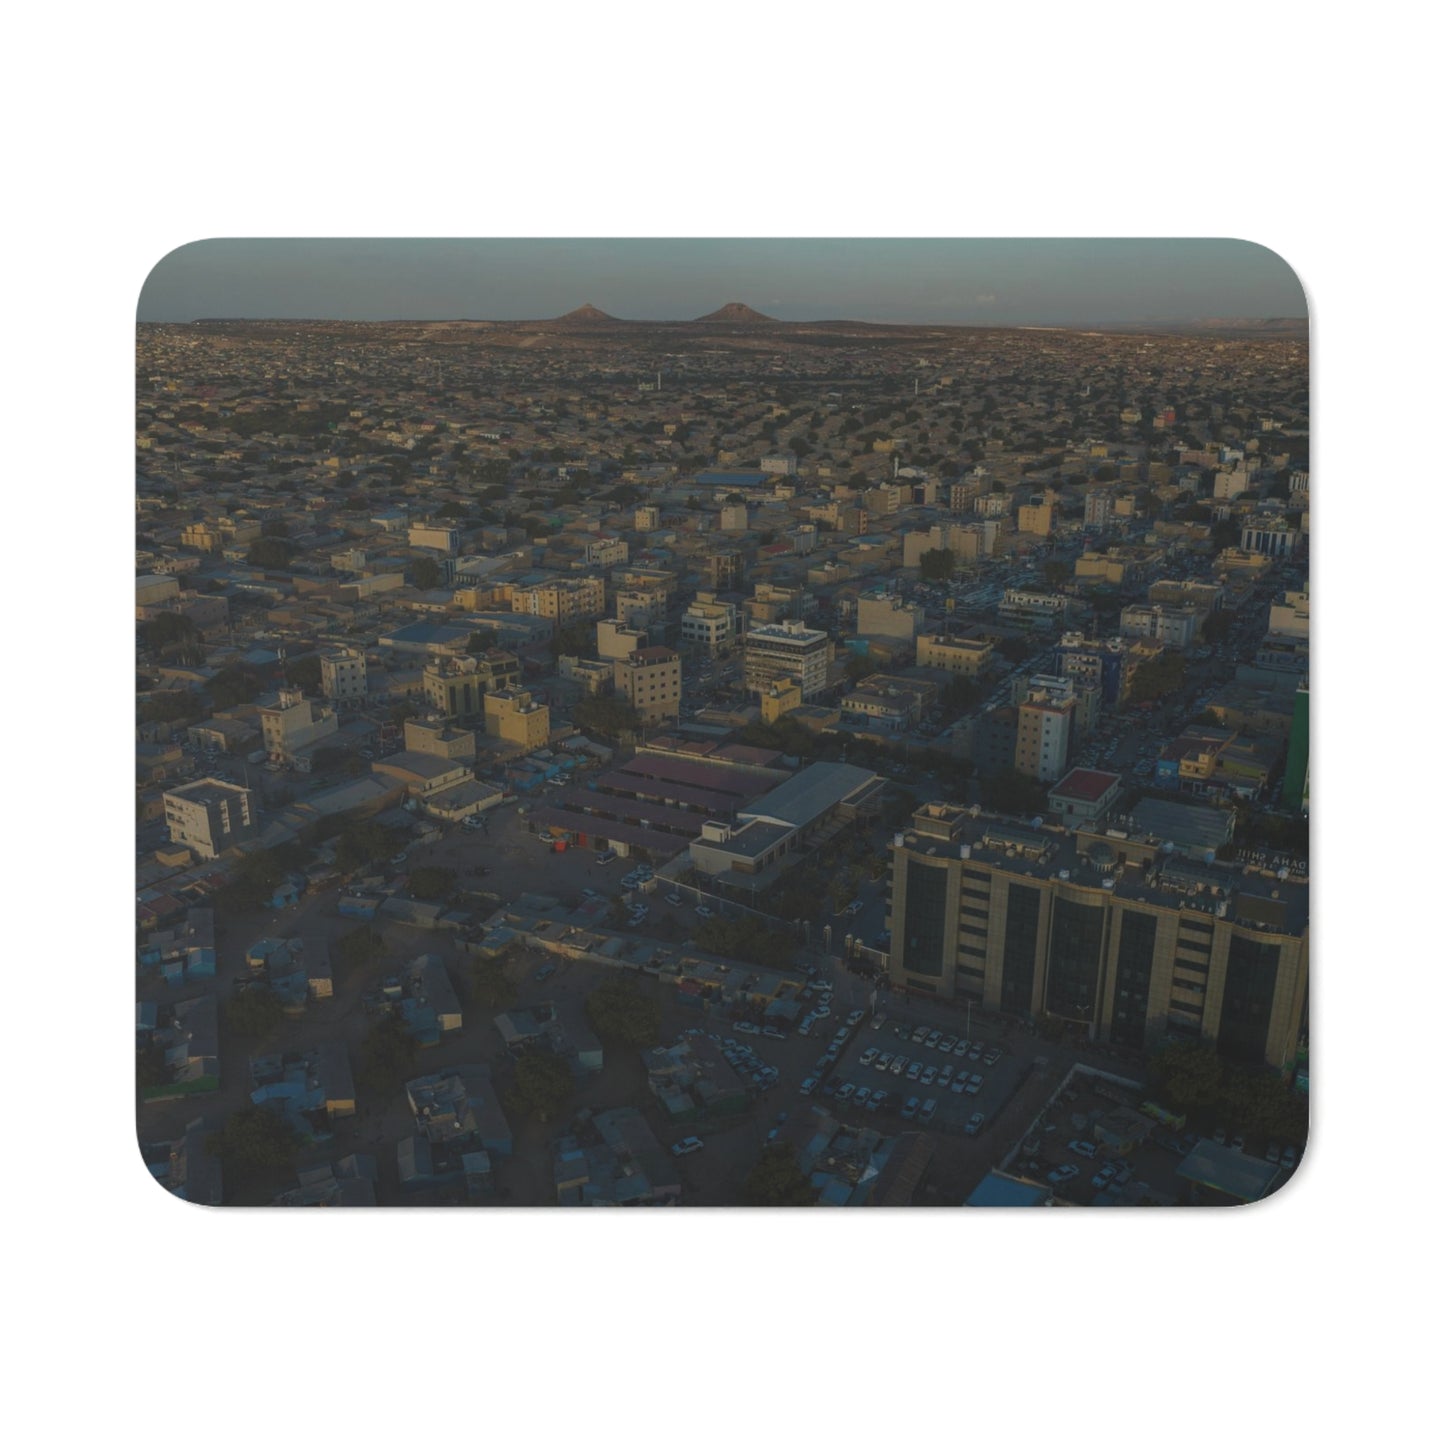 Desk Mouse Pad - Hargeisa by Abdilaahi Persia